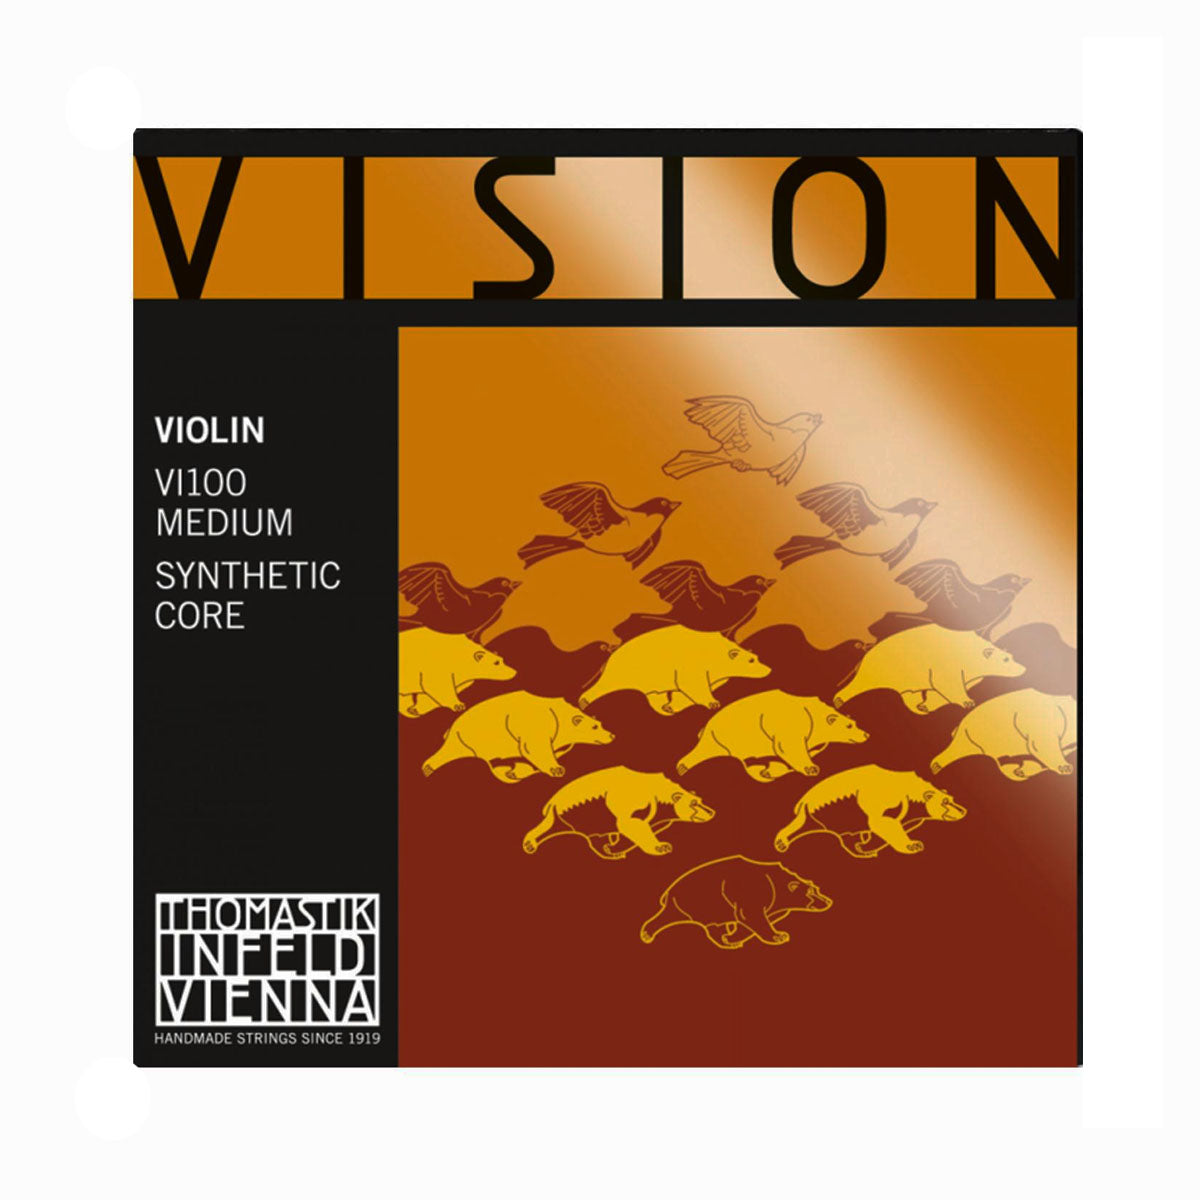 Vision Violin Strings, Thomastik Infeld, Austria, full size, 4/4, 3/4, 1/2, 1/4, 1/8, 1/16, hand-picked and inspected by Violins and such, with TEO musical Instruments, London Ontario Canada